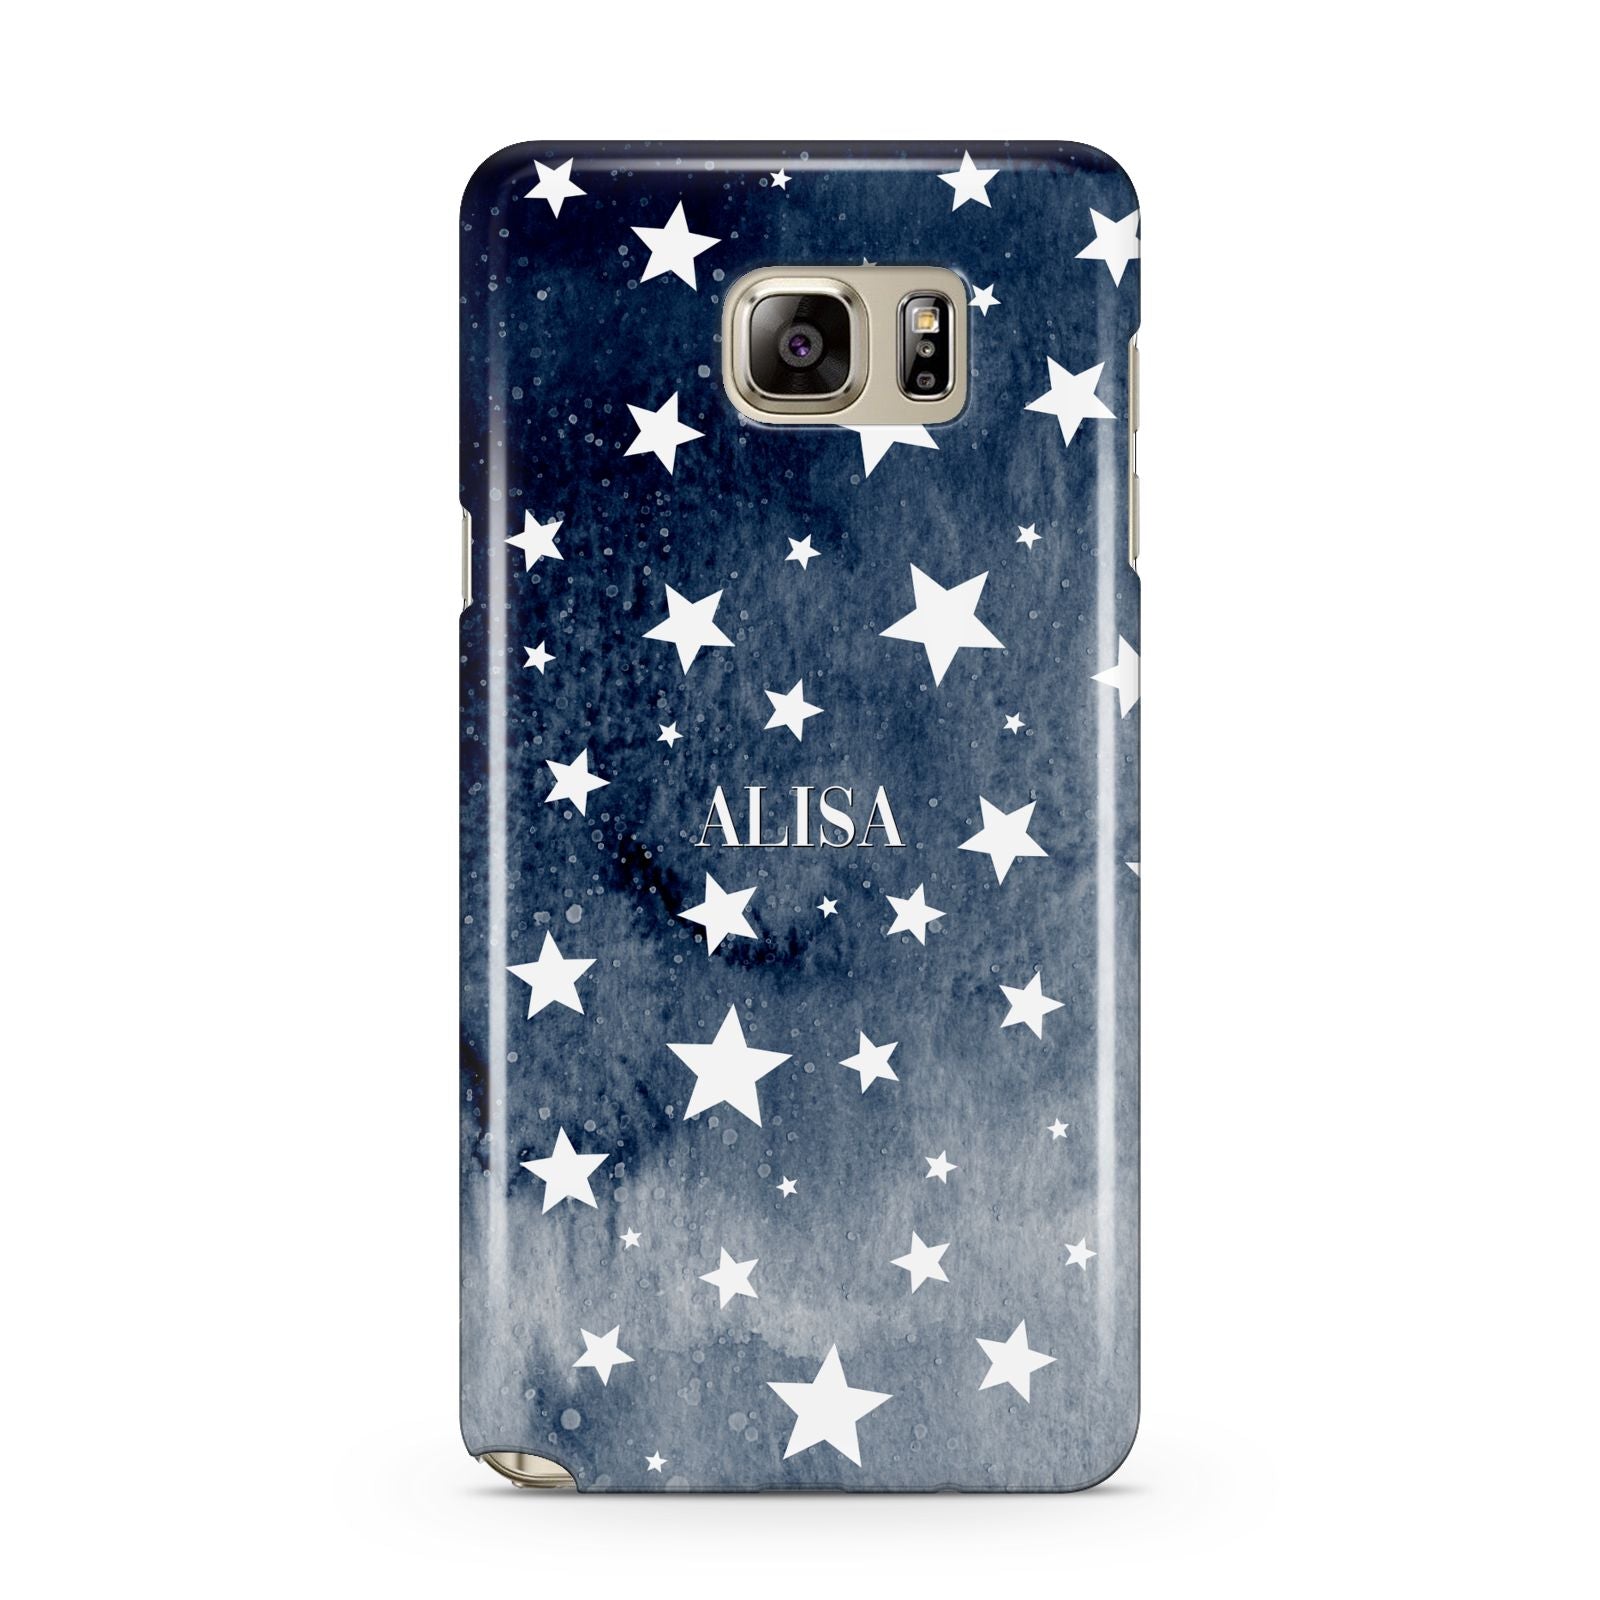 Personalised Star Print Samsung Galaxy Note 5 Case